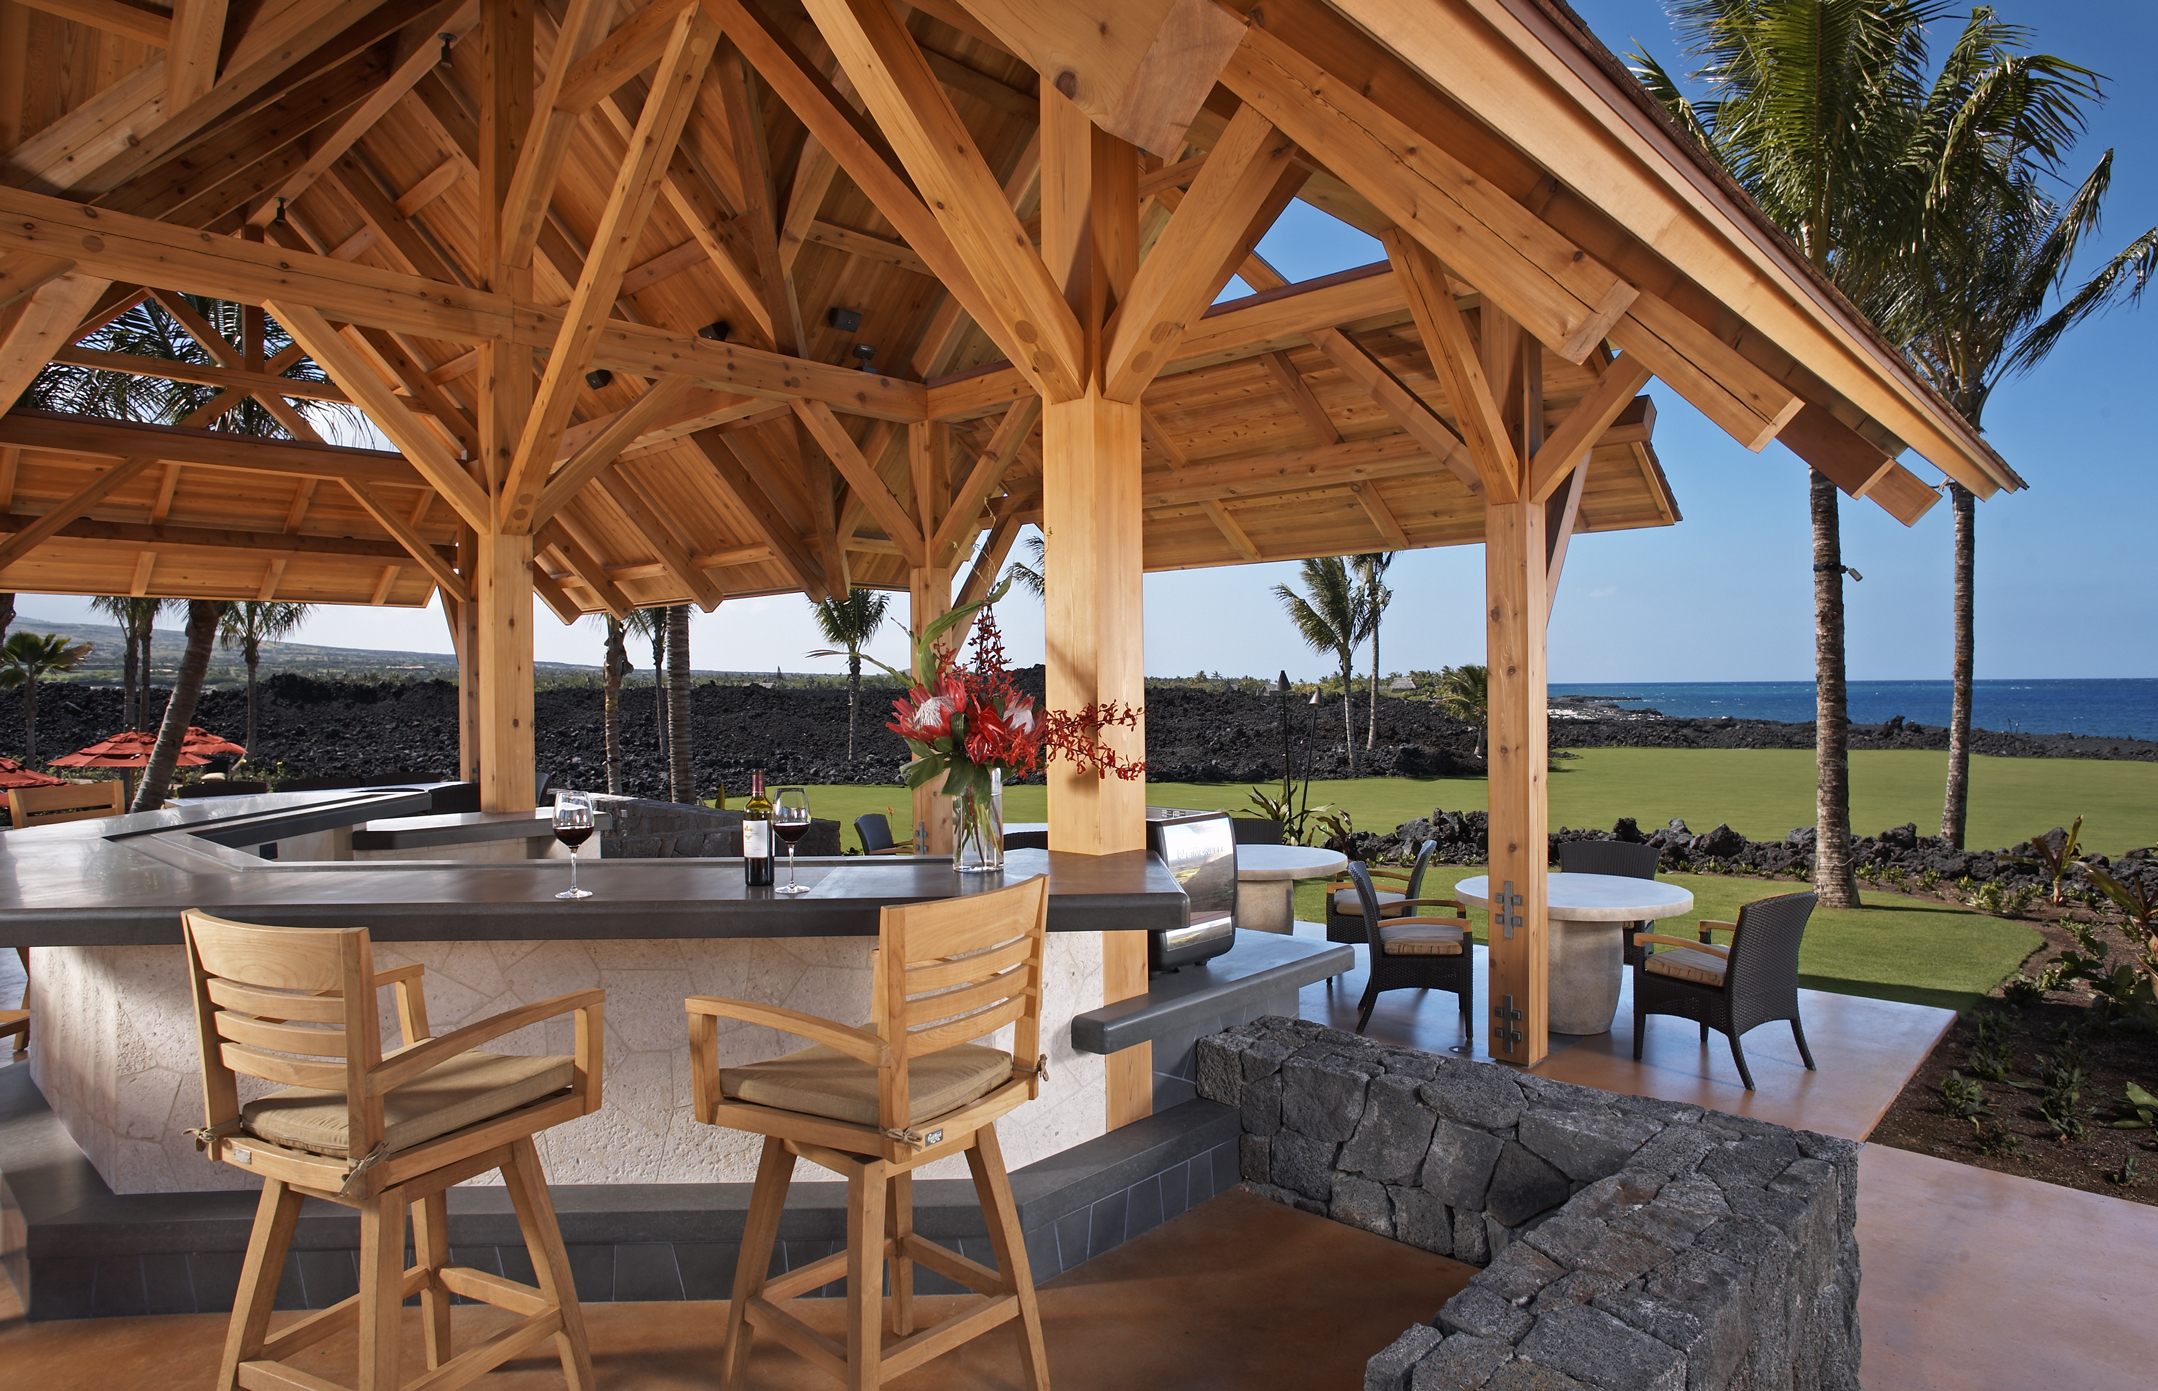 Why You Should Build a Timber Frame Addition to Your Outdoor ...